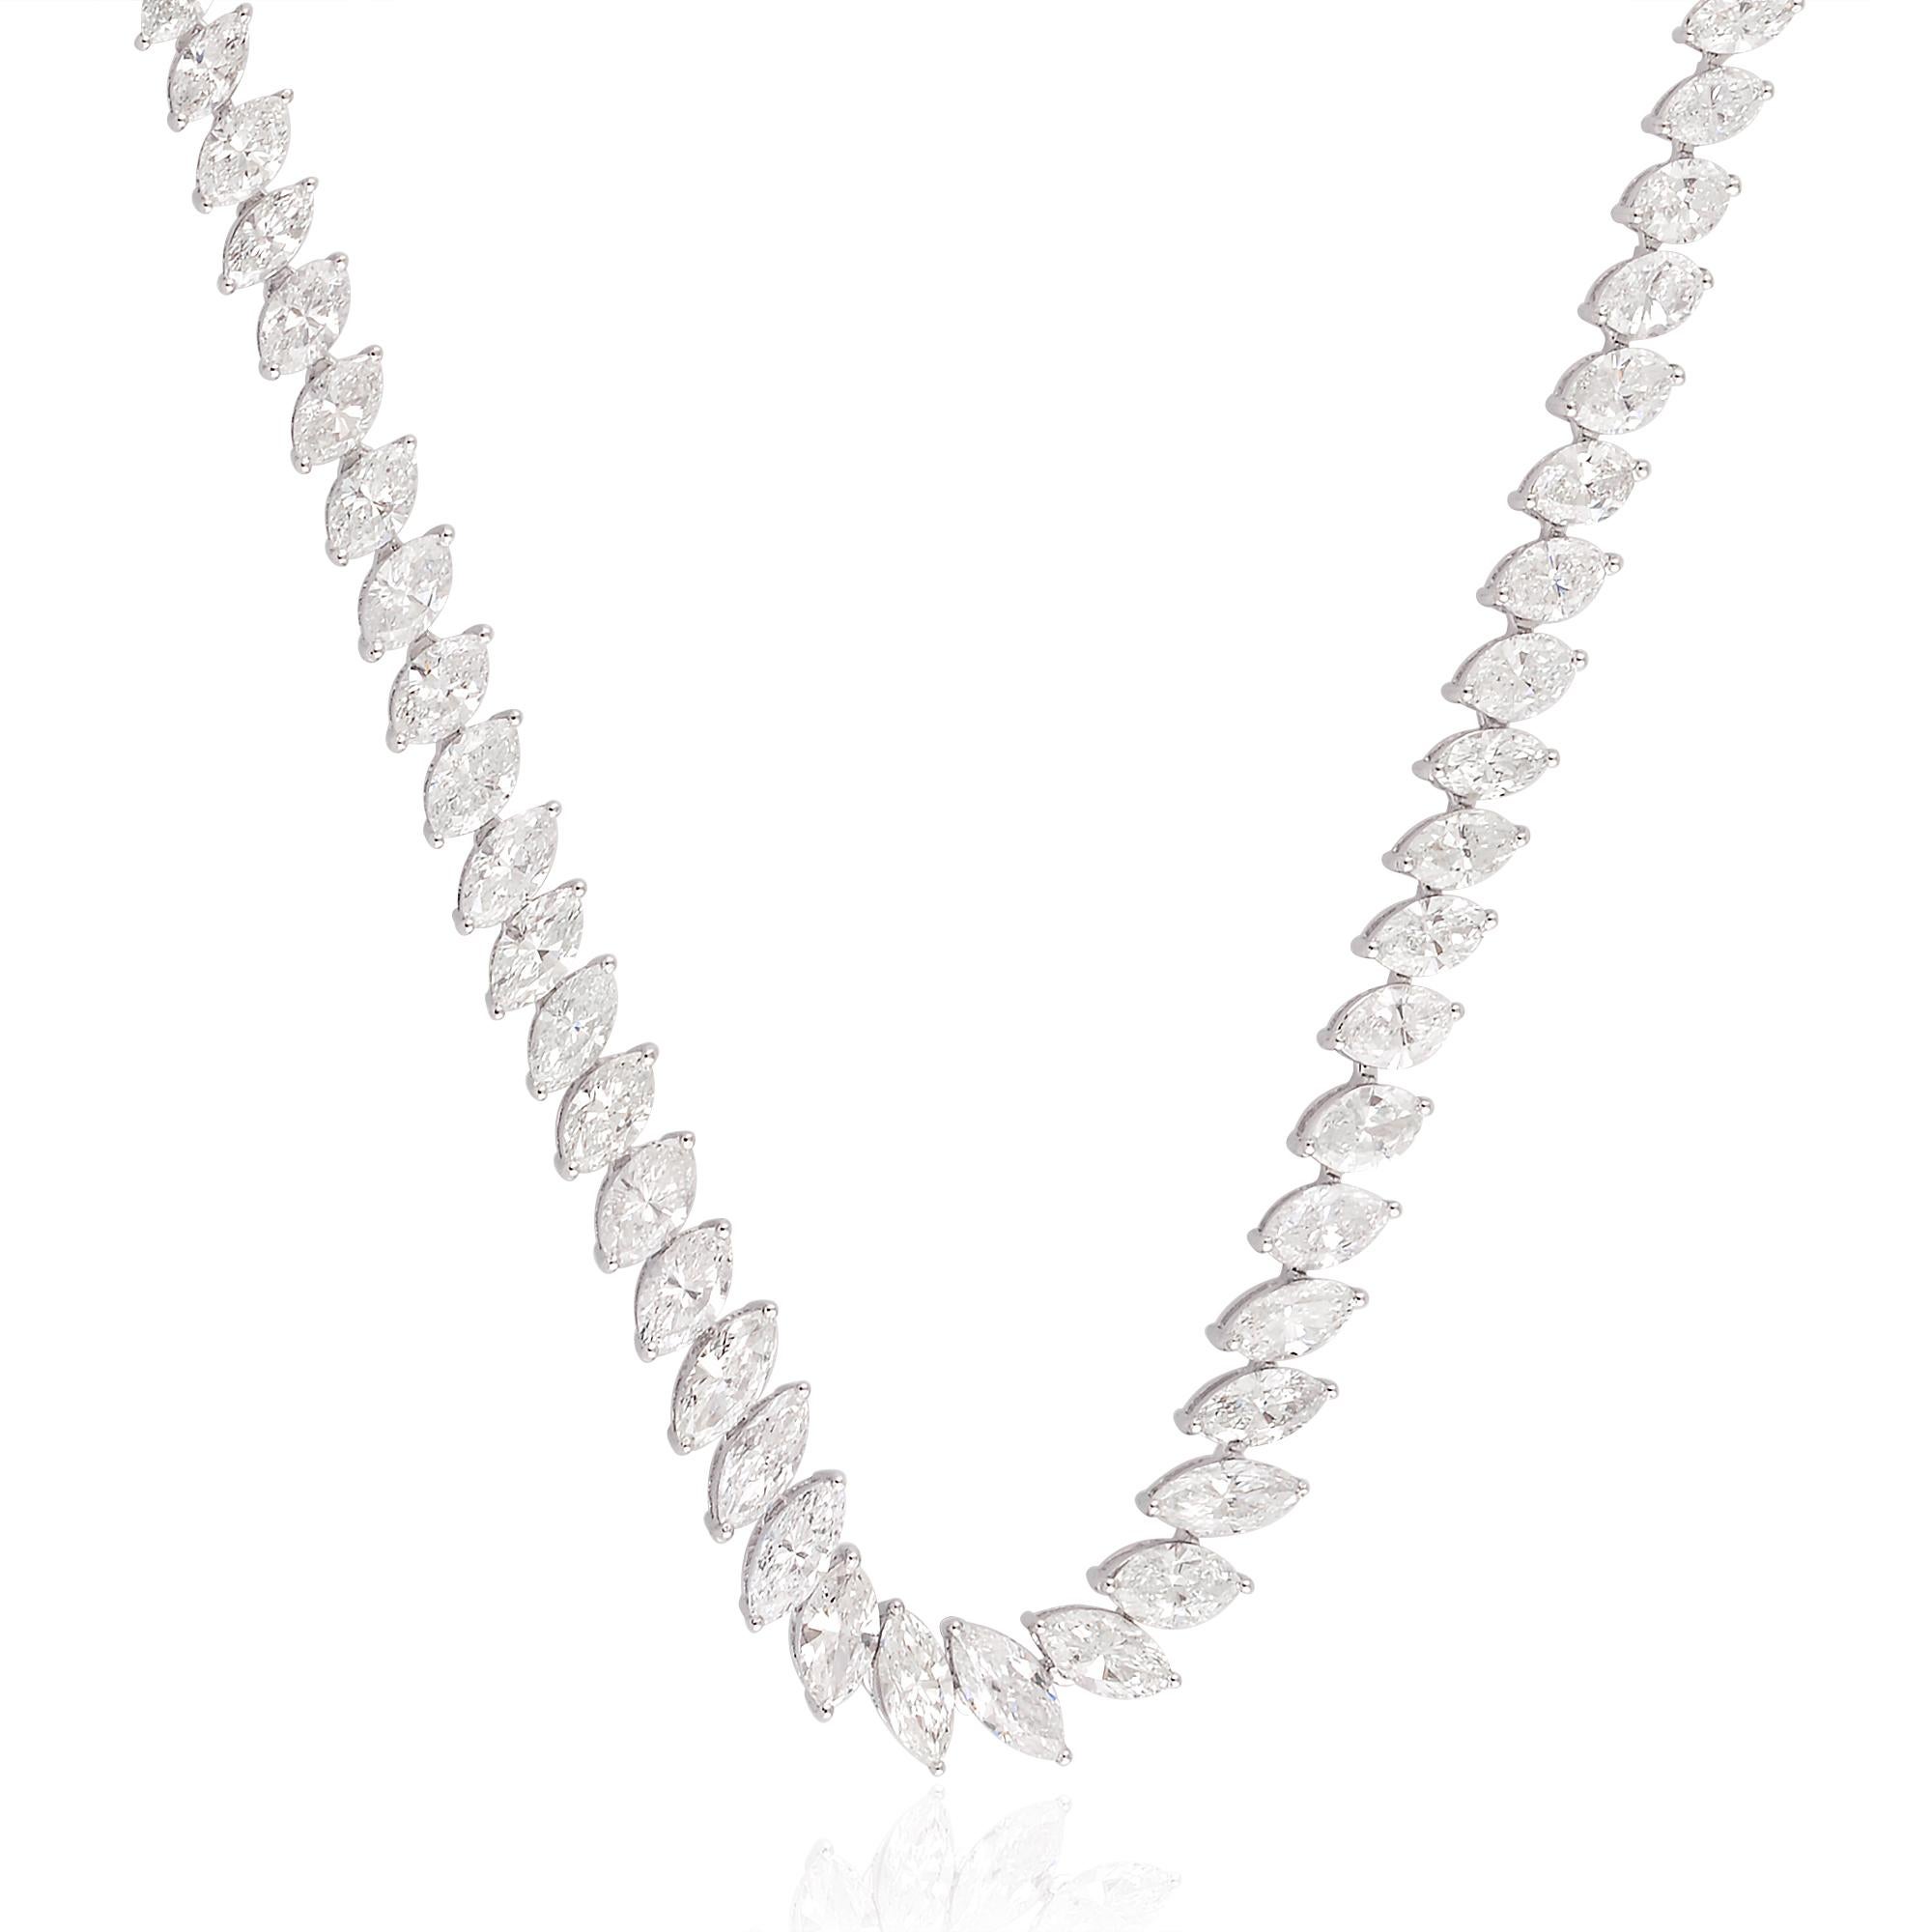 This 12.60 Carat SI Clarity HI Color Marquise Diamond Necklace is a true statement piece that exudes elegance and grandeur. Whether worn for a special occasion or to add a touch of glamour to everyday attire, it is guaranteed to capture attention